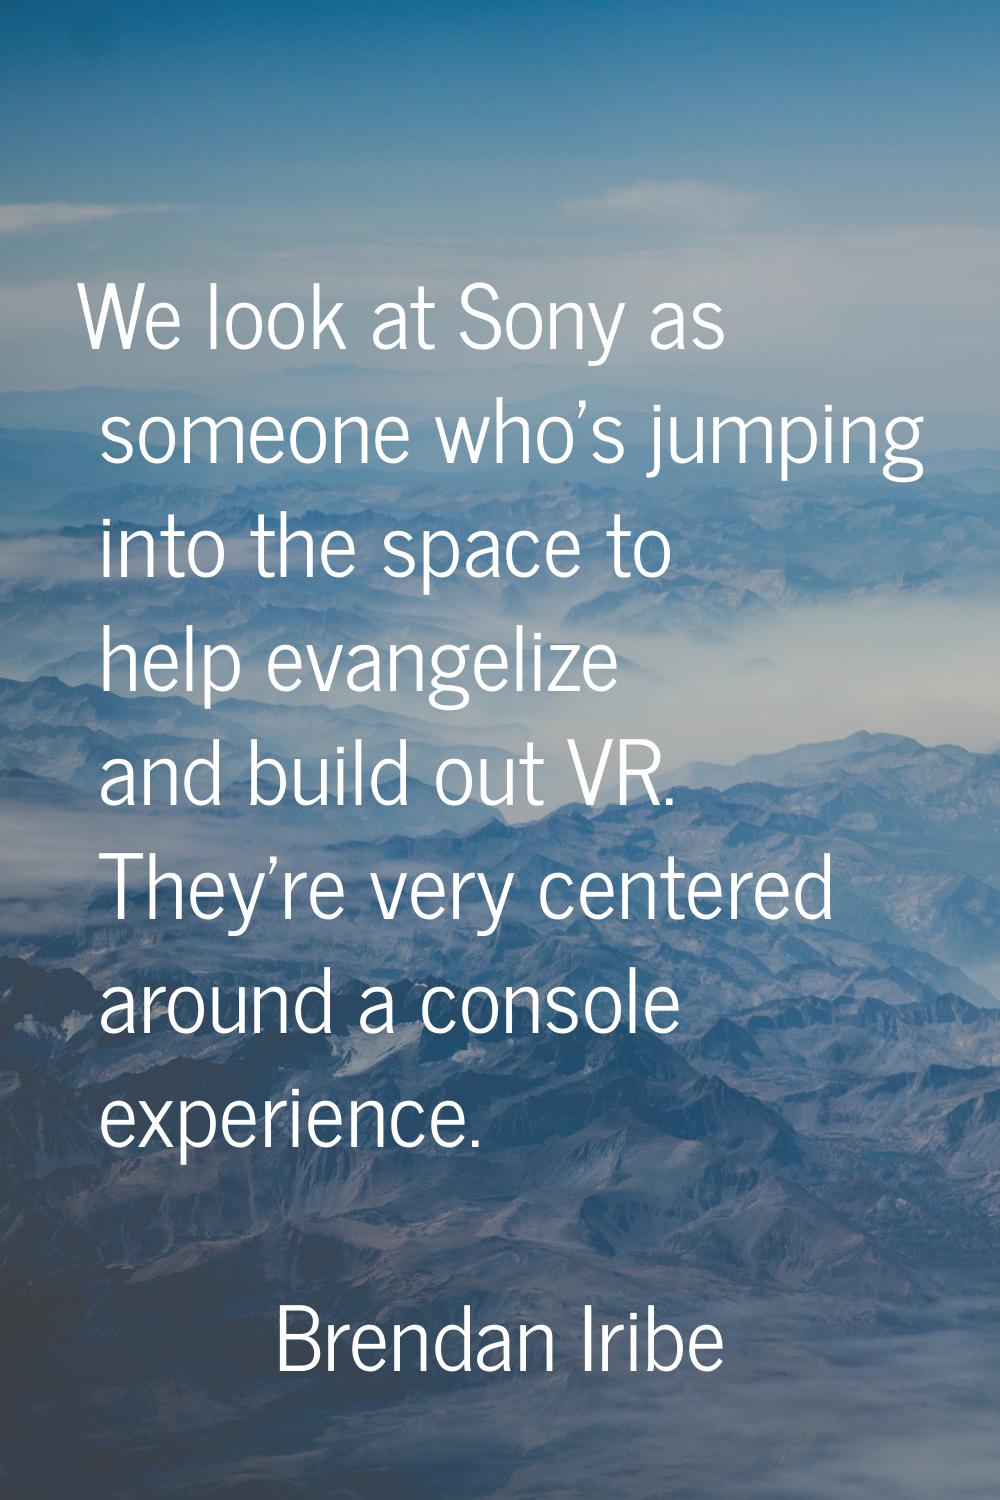 We look at Sony as someone who's jumping into the space to help evangelize and build out VR. They'r